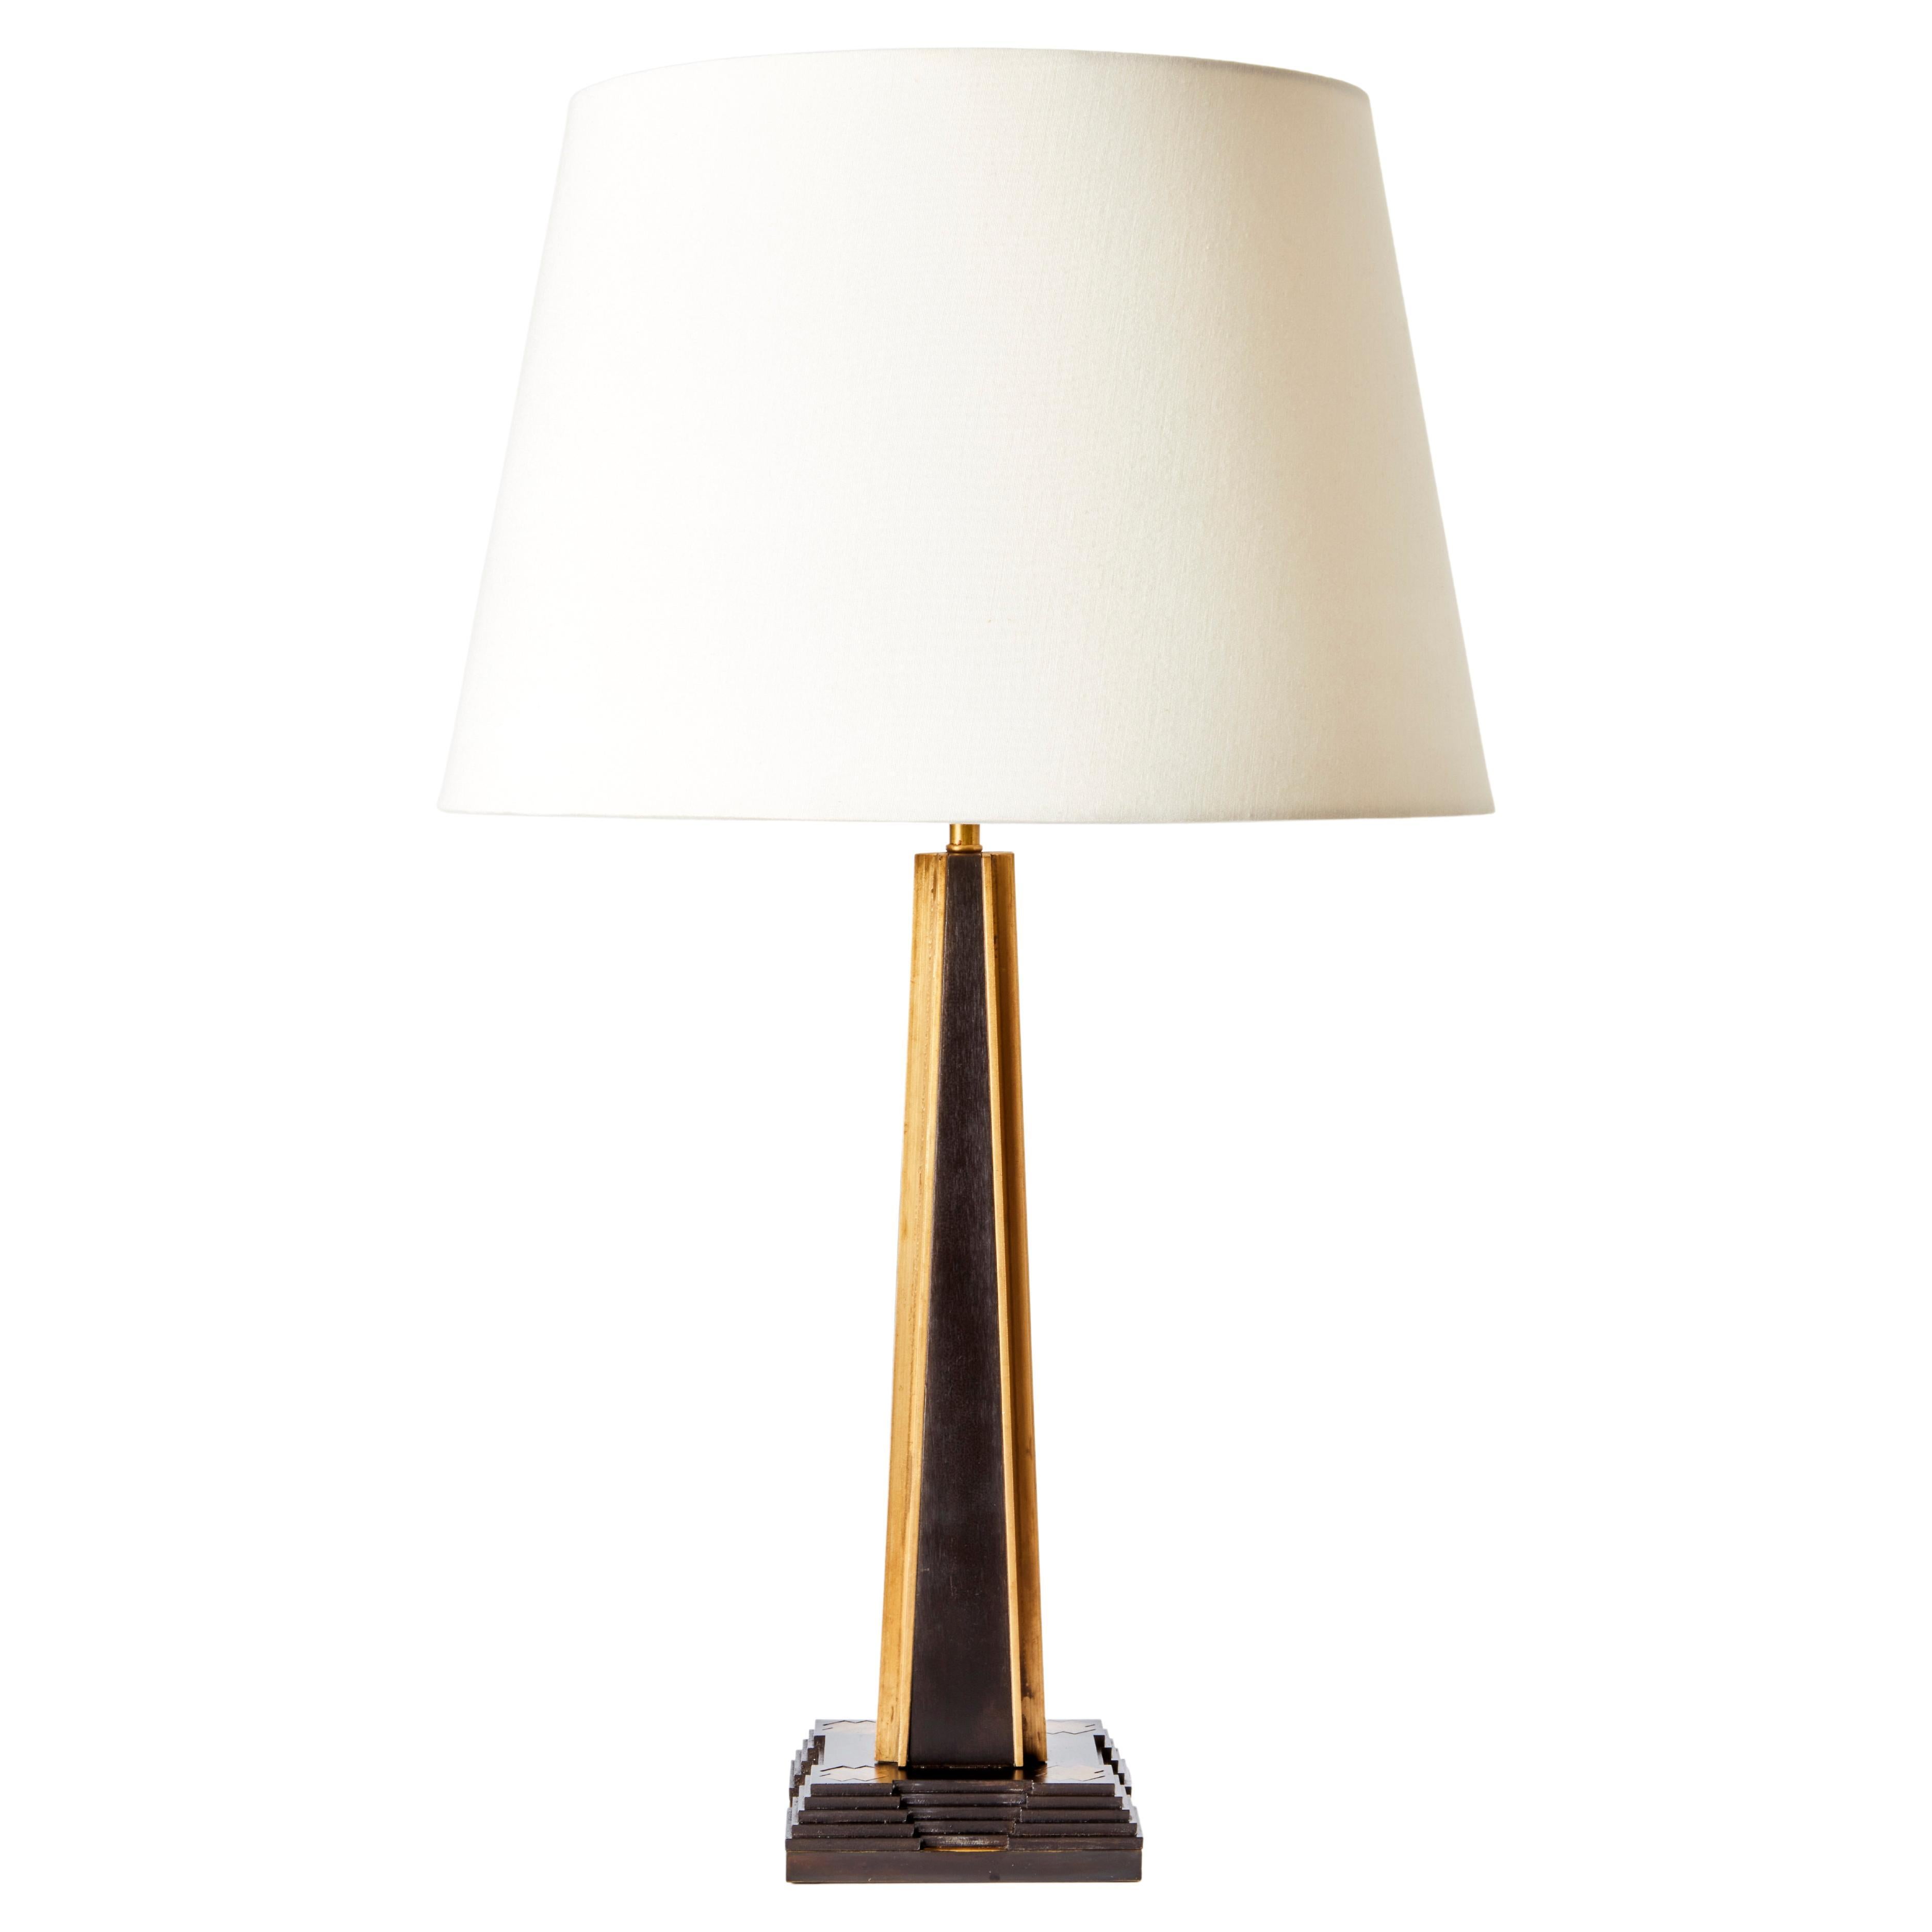 Contemporary Art Deco 'Meso' Table Lamp with Inlayed Brass For Sale